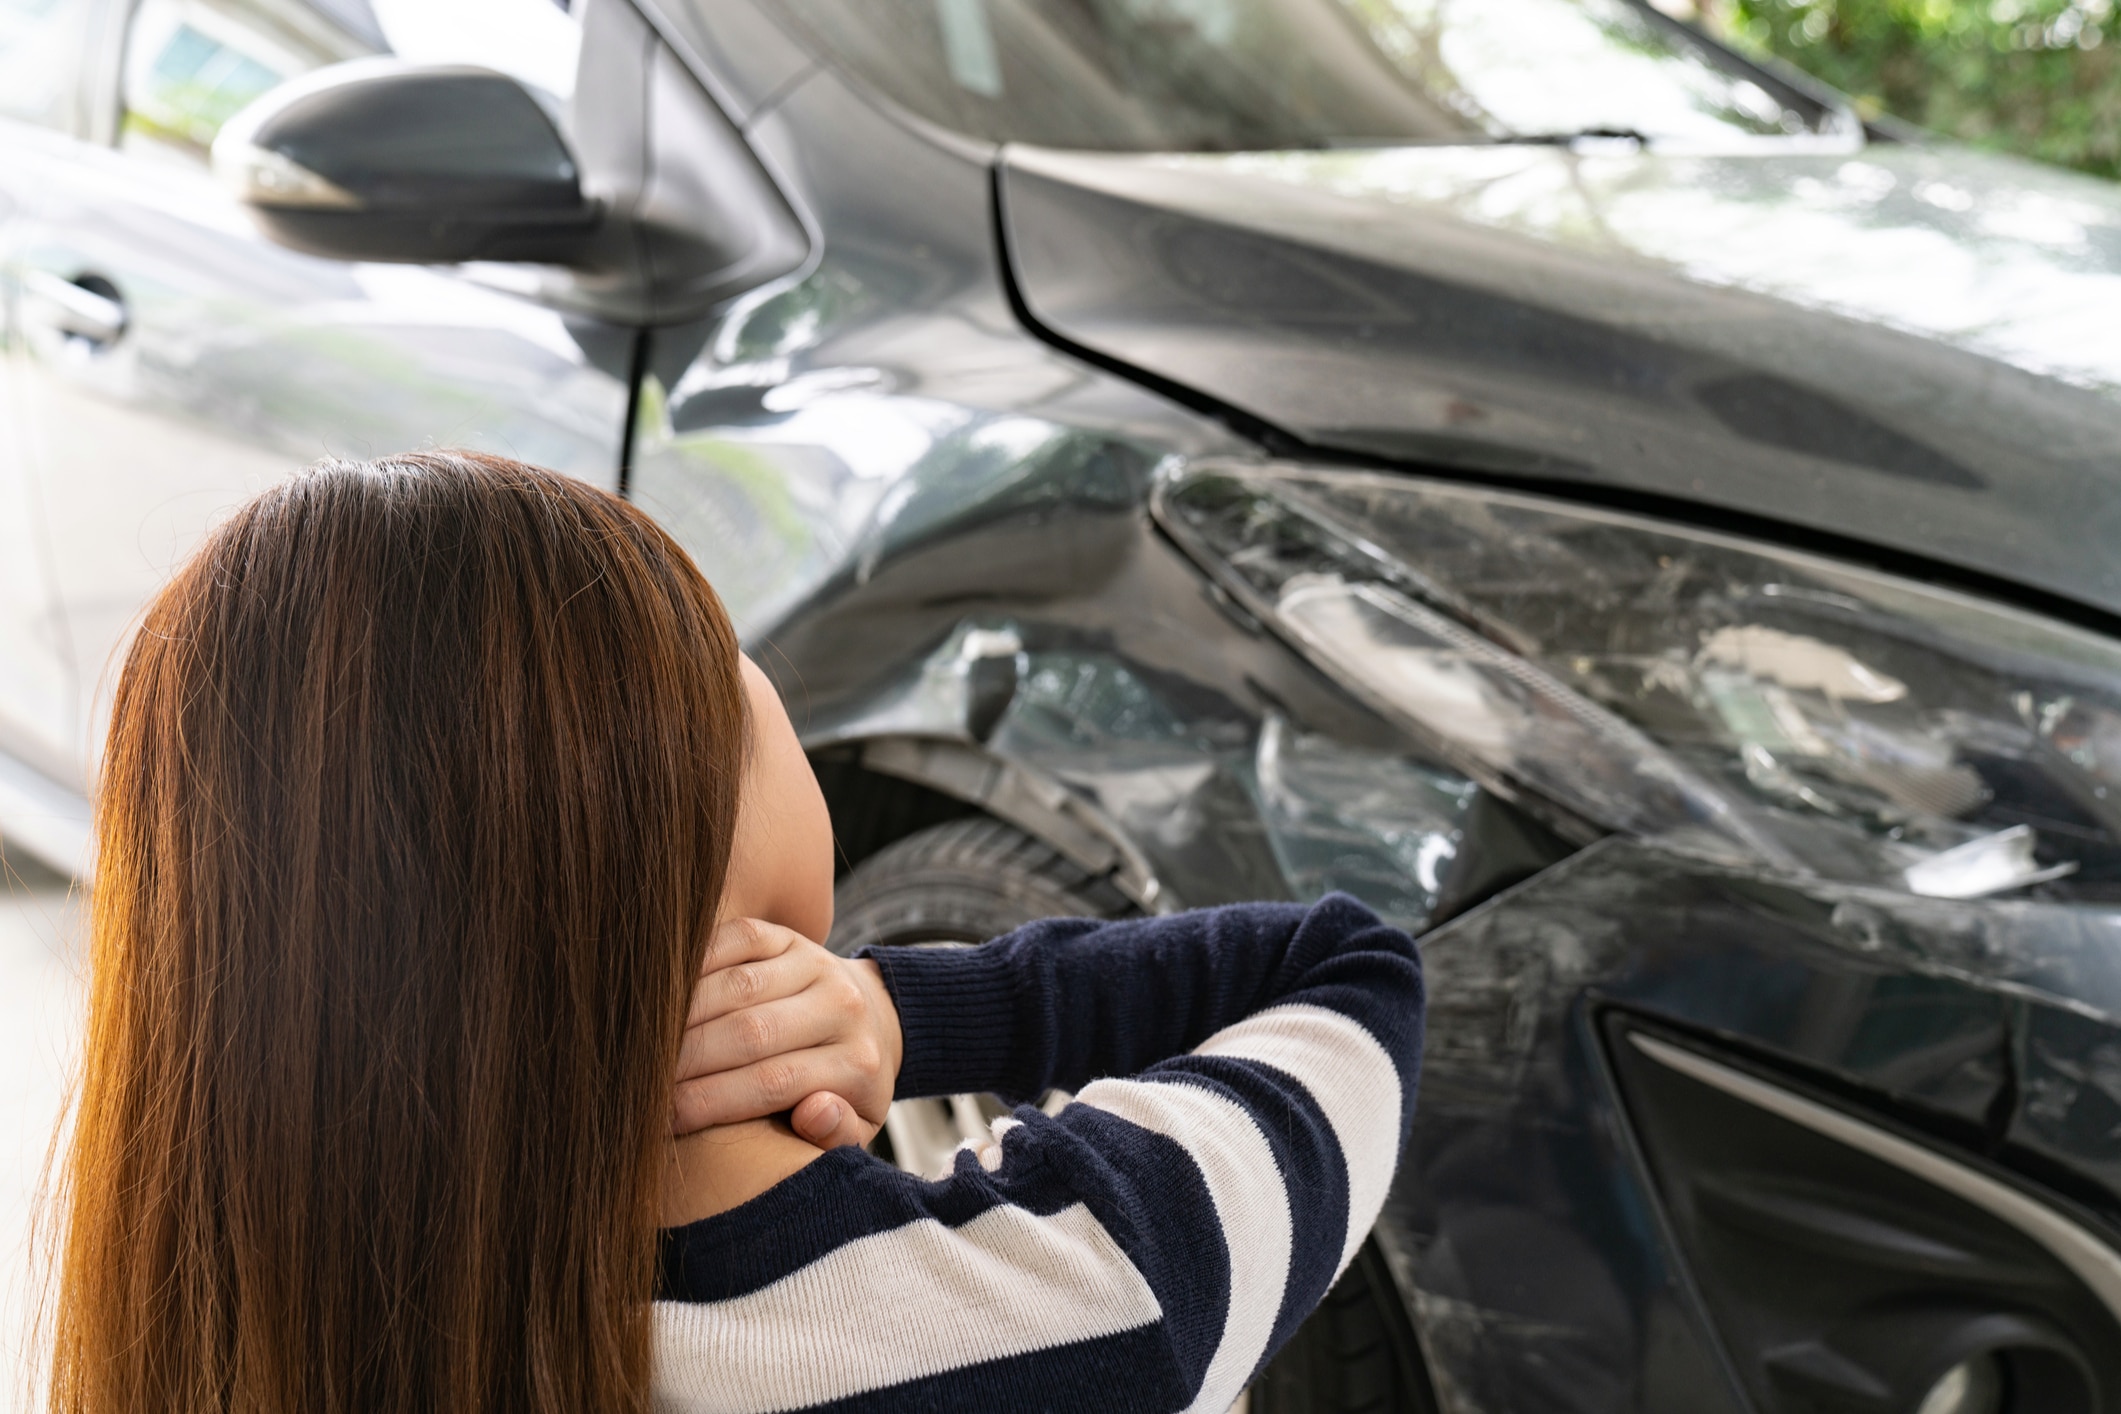 No One Got A Ticket In The Crash Can I Still File An Injury Claim - Myers Law Firm